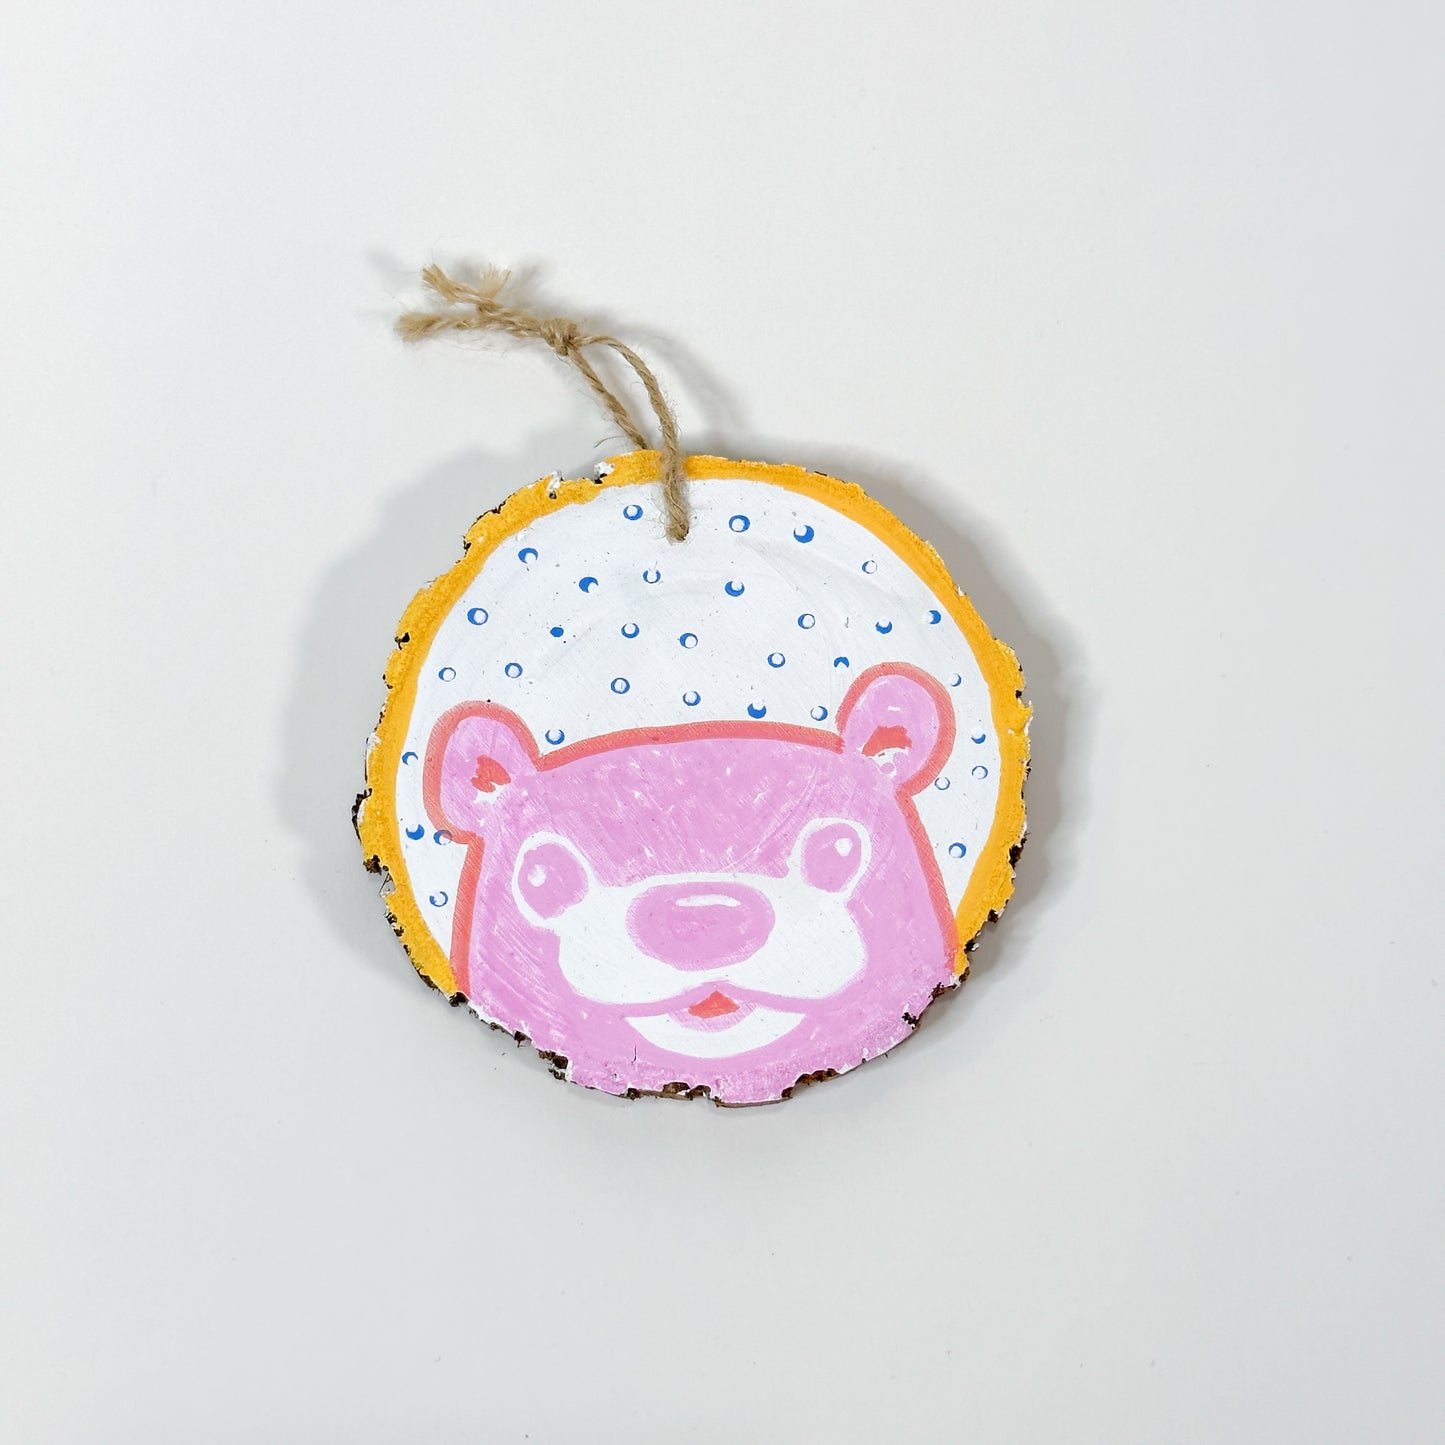 Hand Painted Animal Ornament, Pink Otter